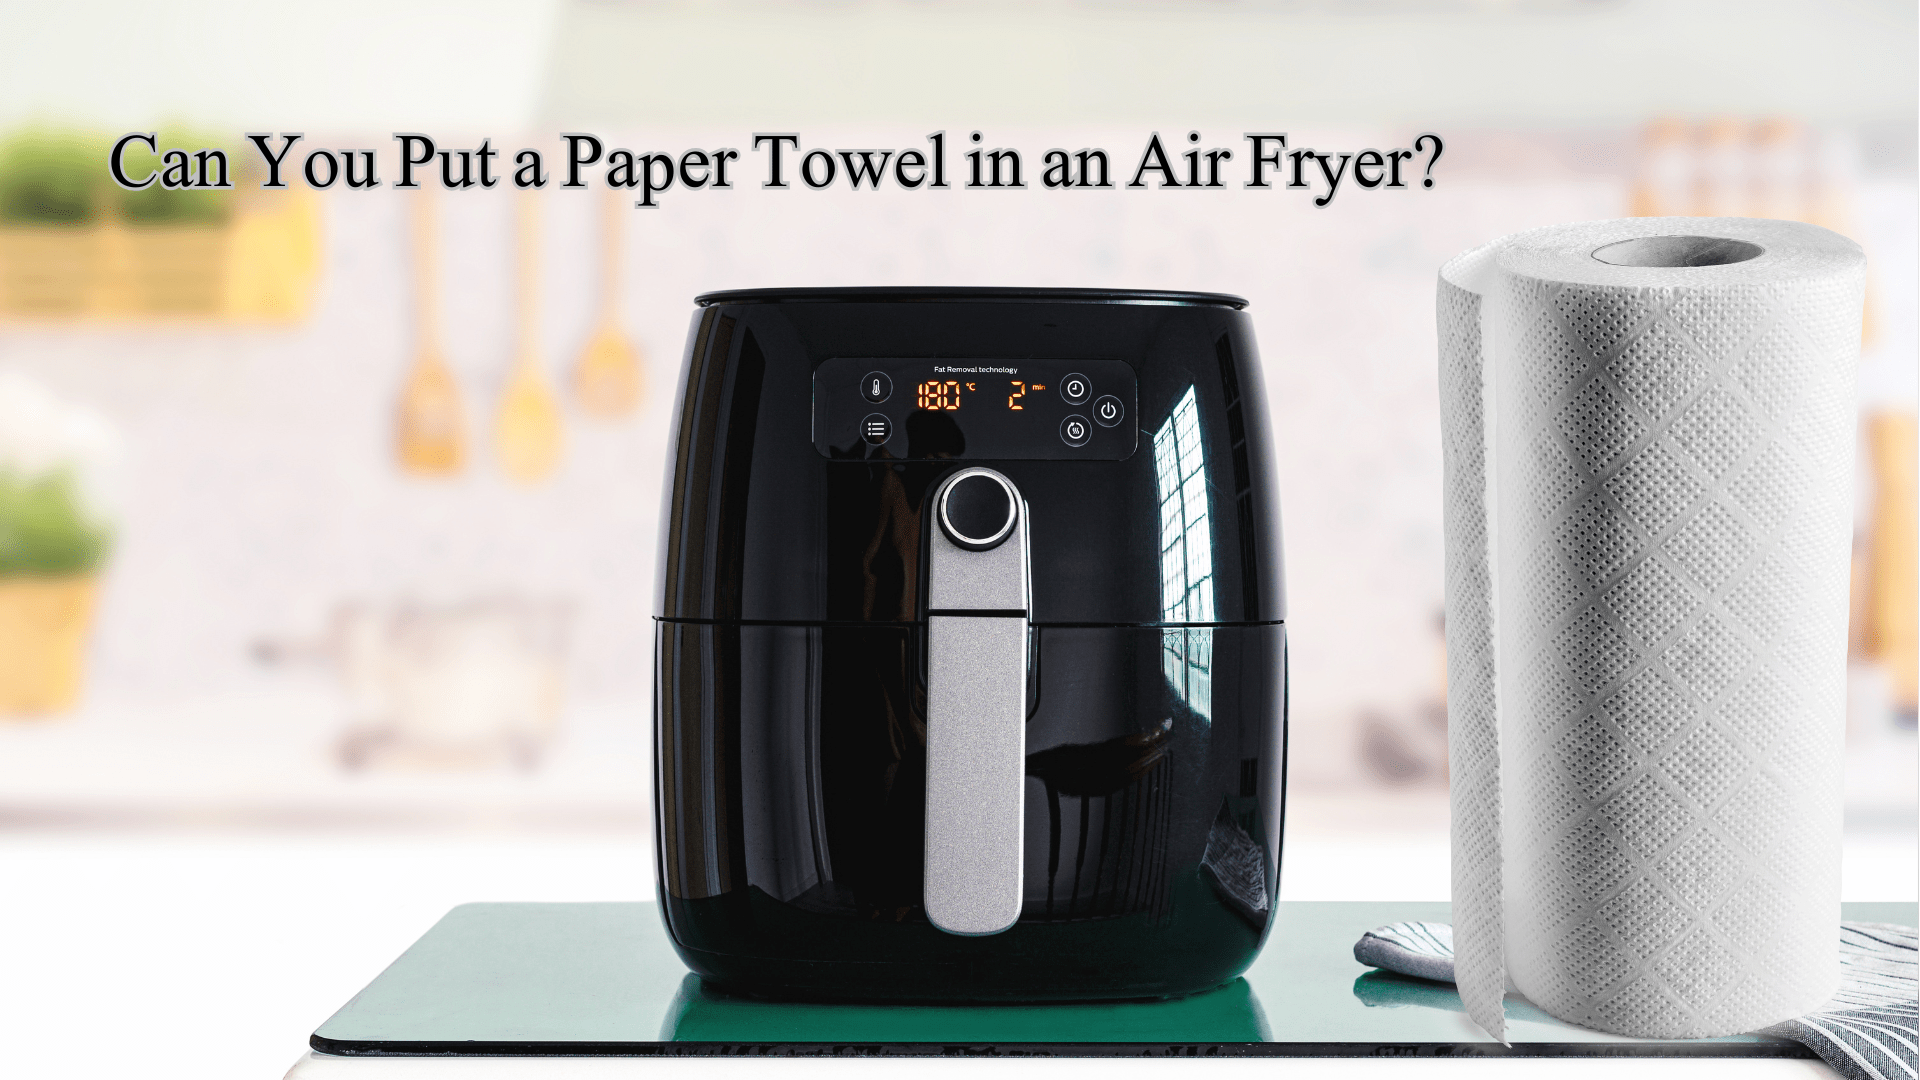 Can You Put a Paper Towel in an Air Fryer? In this article, we'll delve into this question and explore the safety aspects and alternatives to using paper towels in your air fryer.